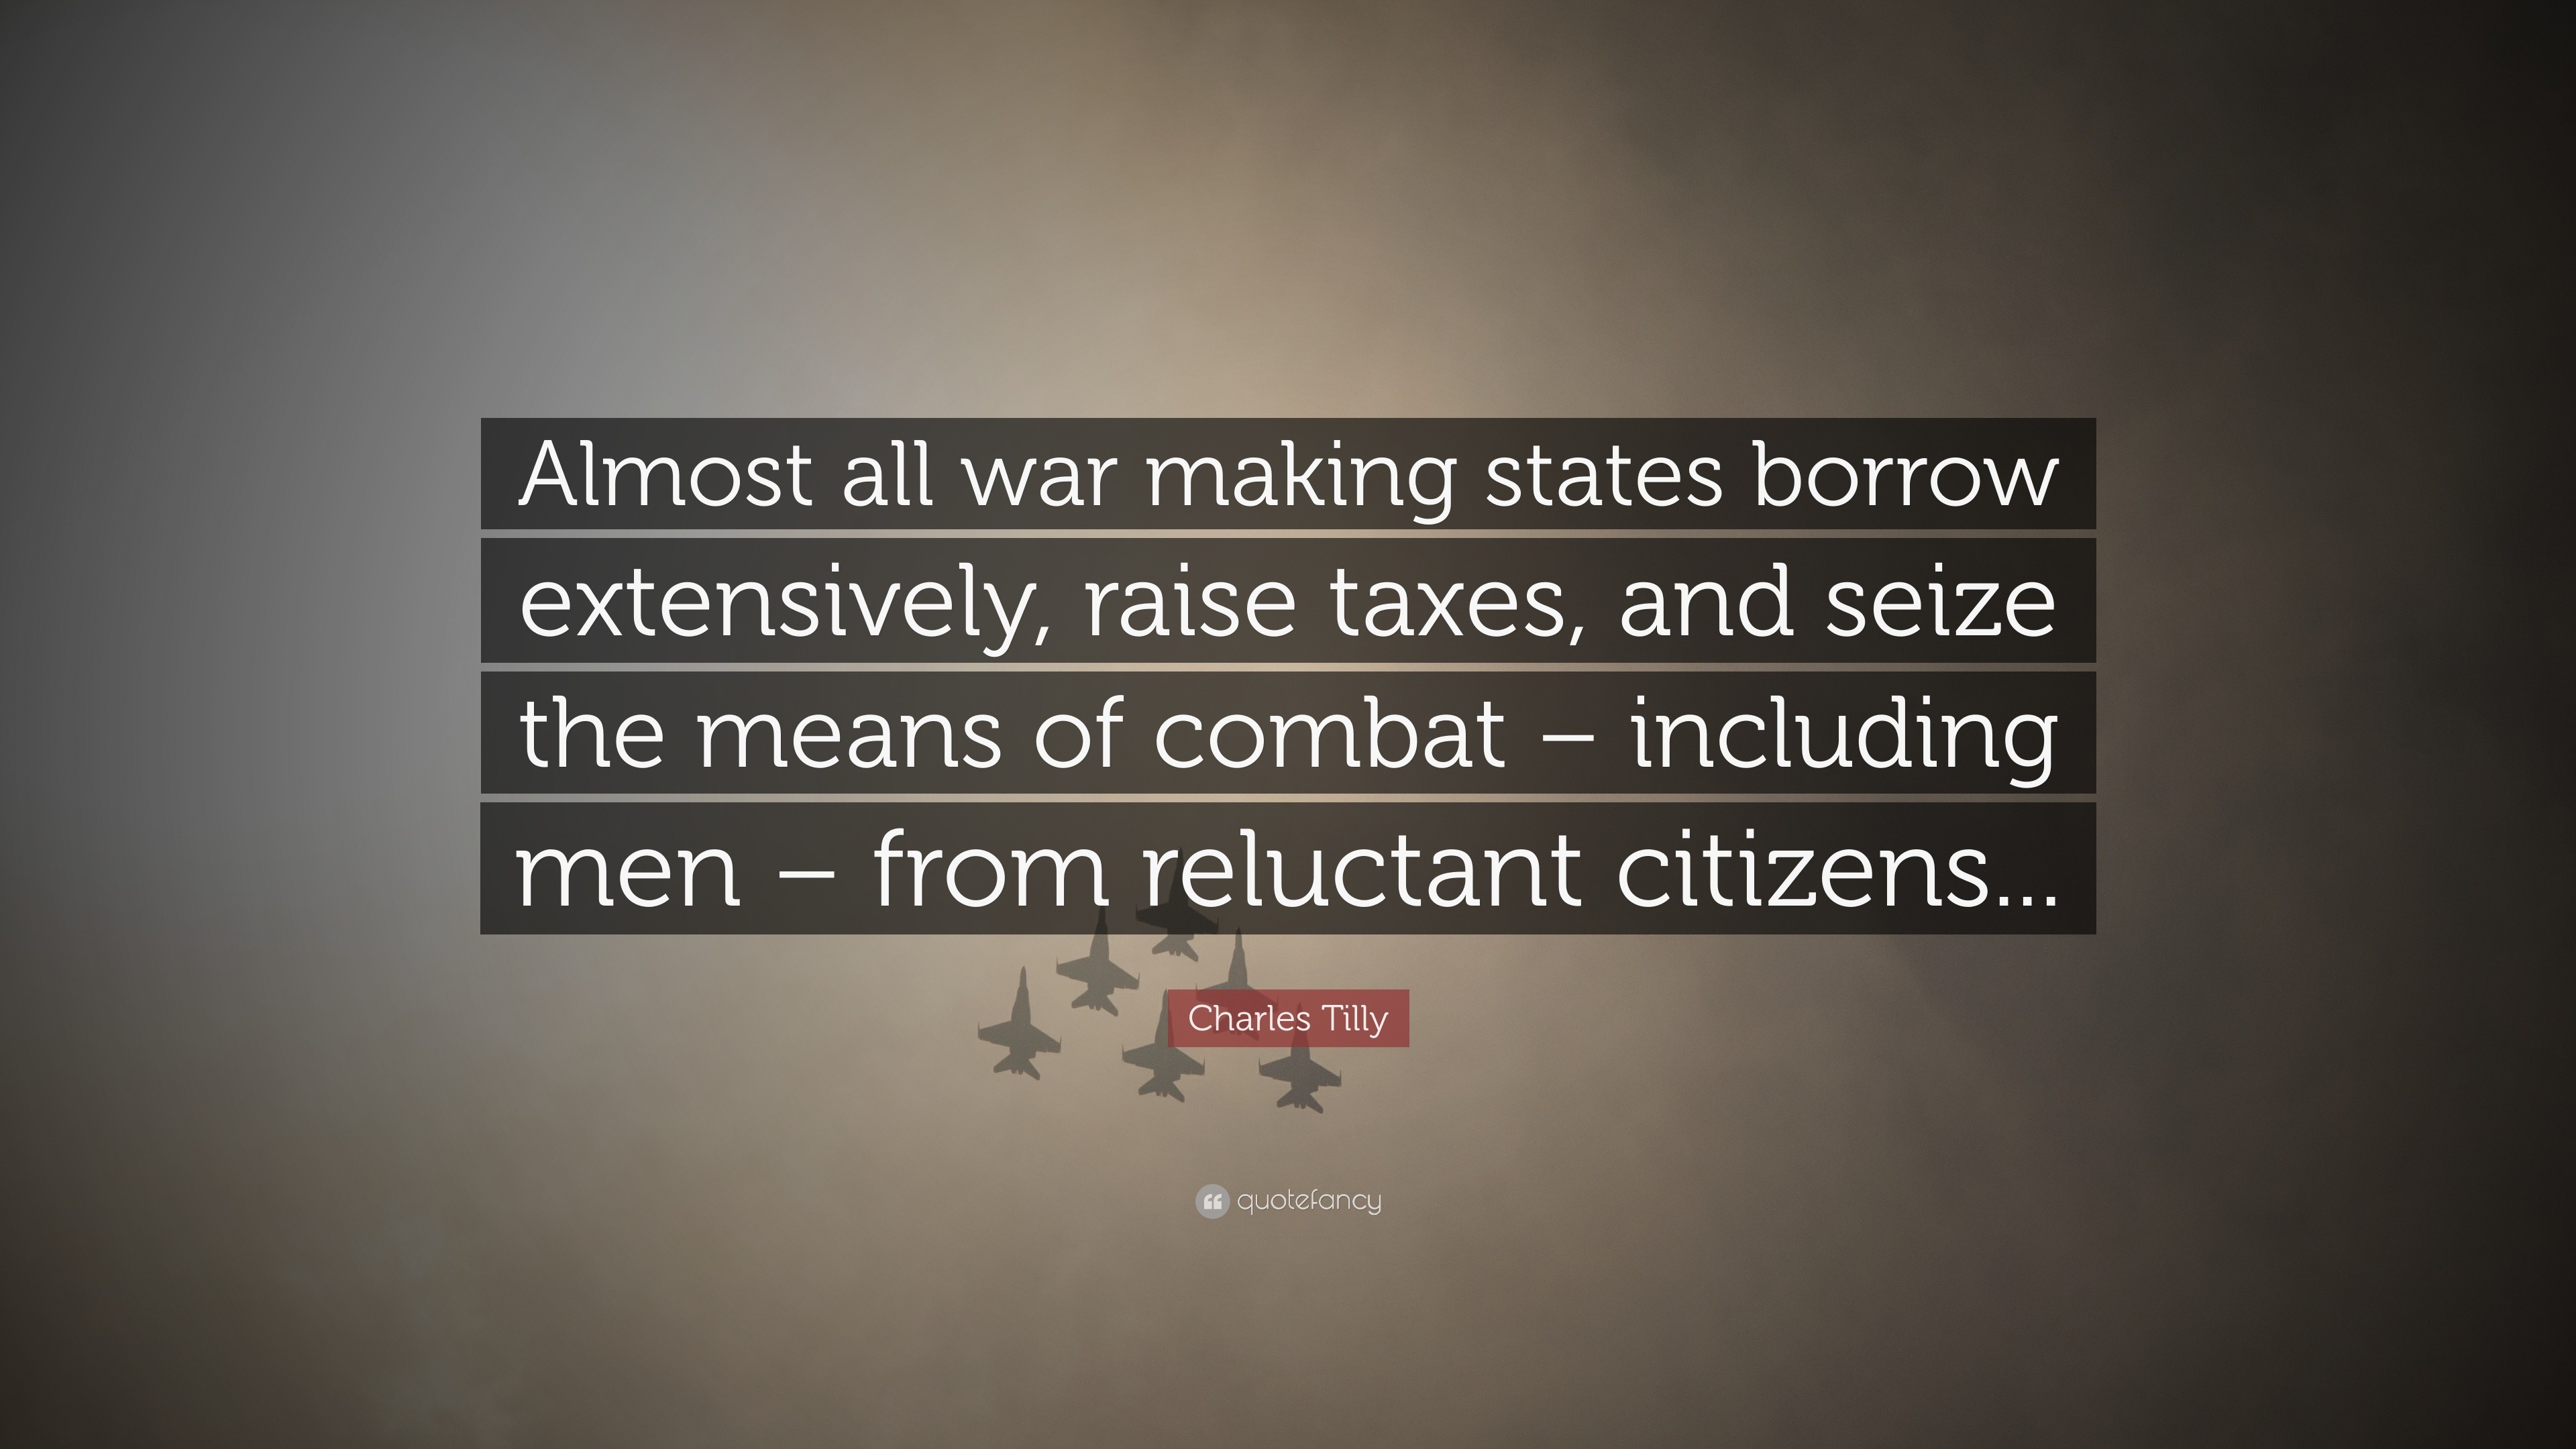 Charles Tilly Quote: “Almost all war making states borrow extensively ...